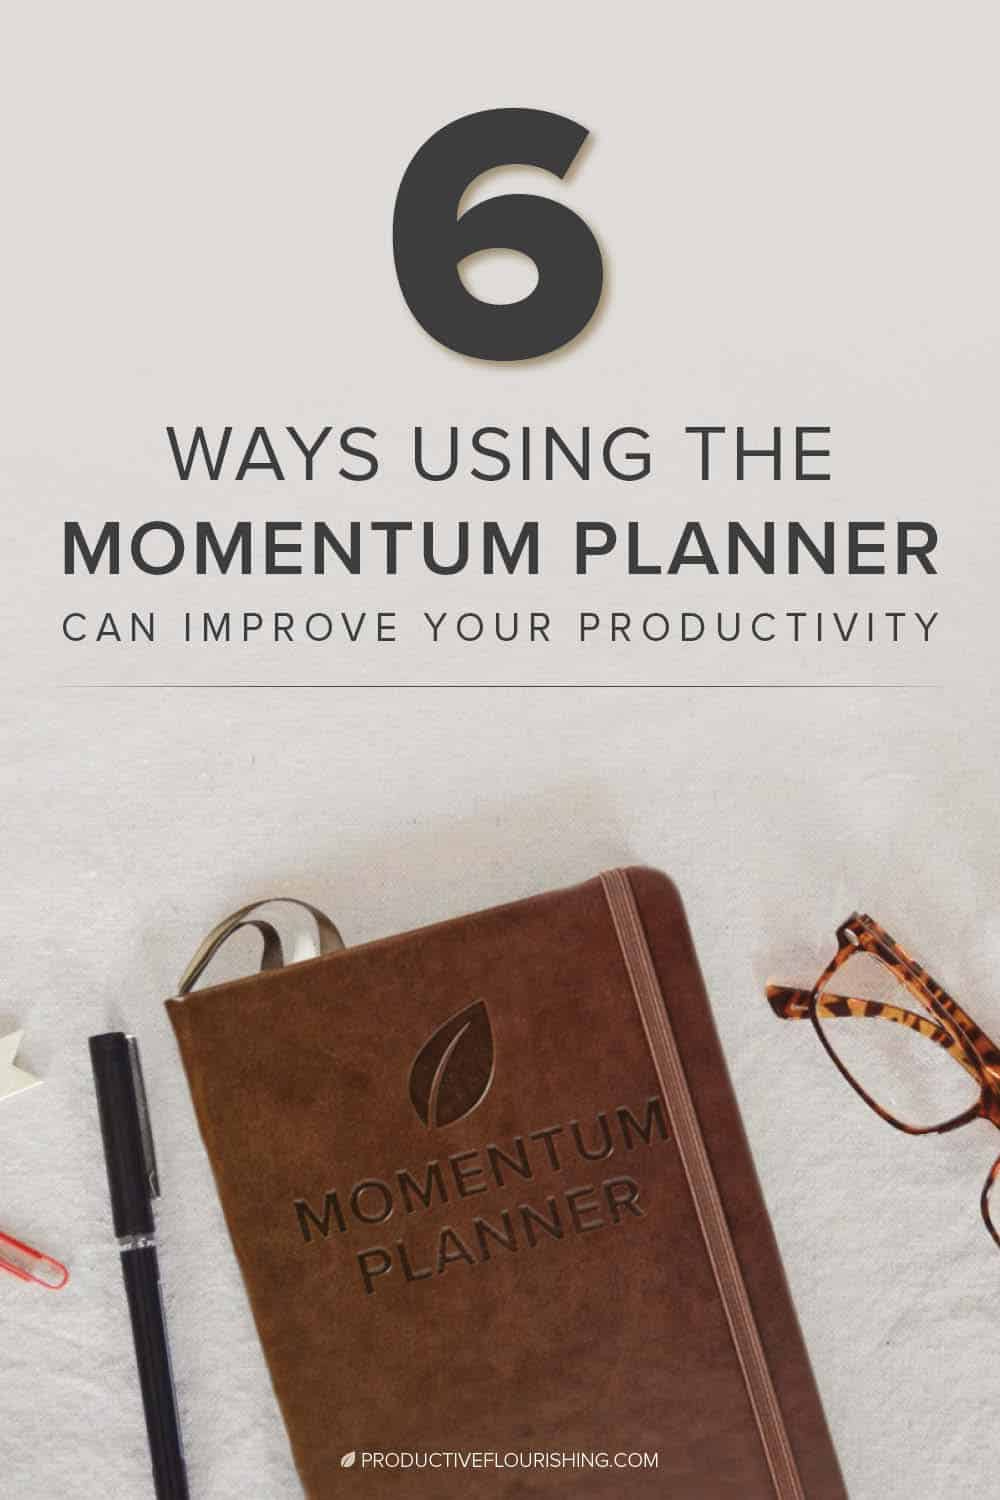 I haven’t explicitly explained how a pre-made, physical, bound Momentum Planner can add value to your planning processes and improve your productivity over a purely digital version. Find out the 6 ways our planner can help you. #businessplanner #productivity #productiveflourishing